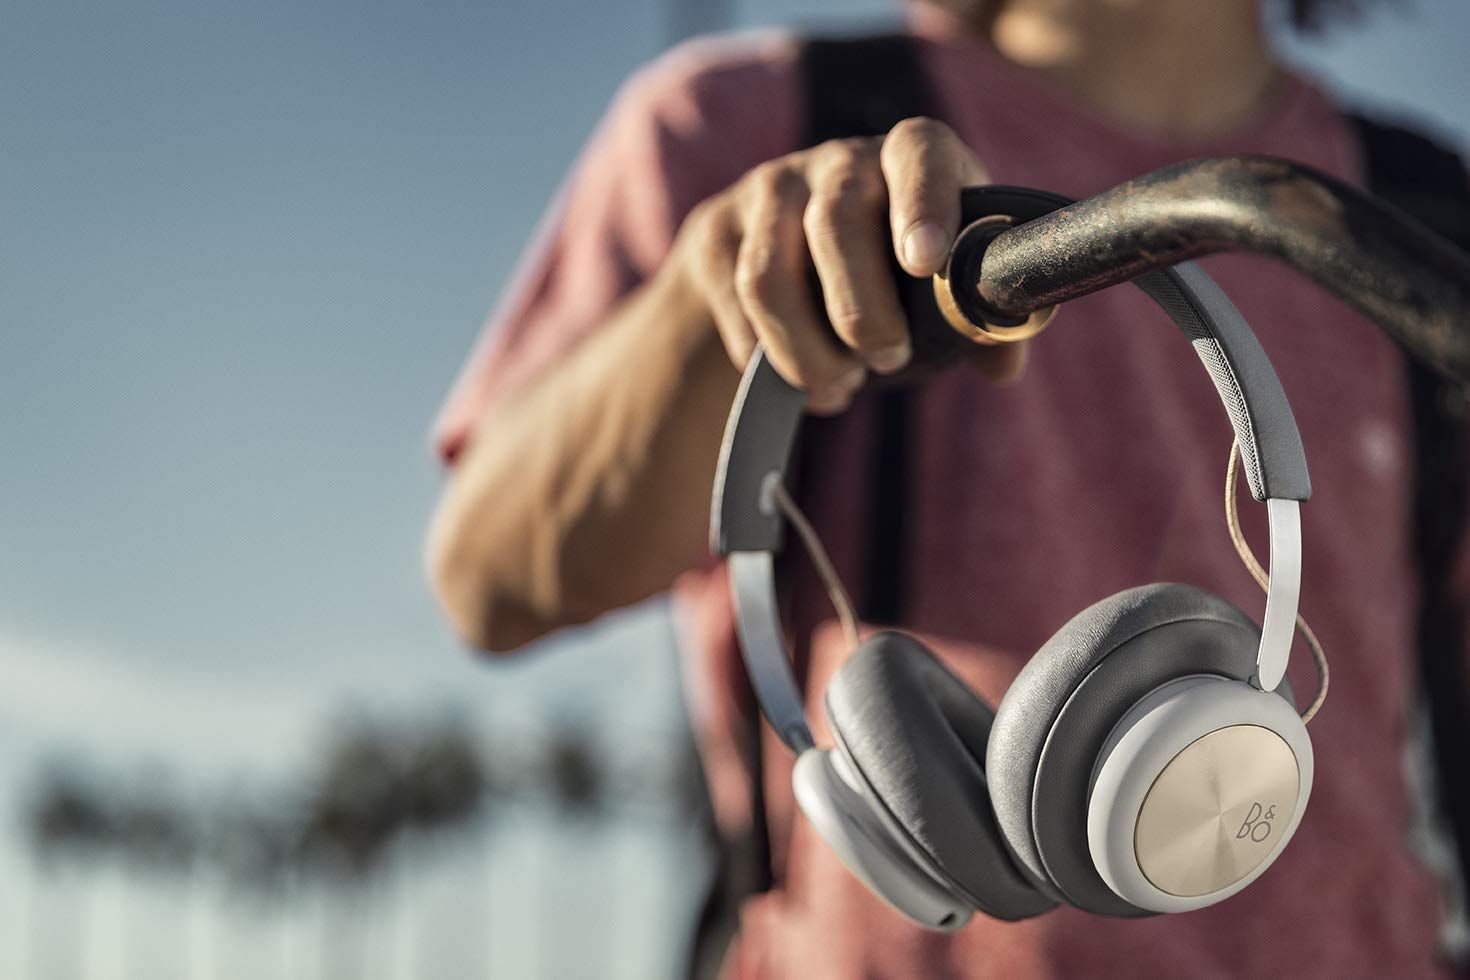 Bang & Olufsen Beoplay H4 Headphones are On Sale at Amazon Today